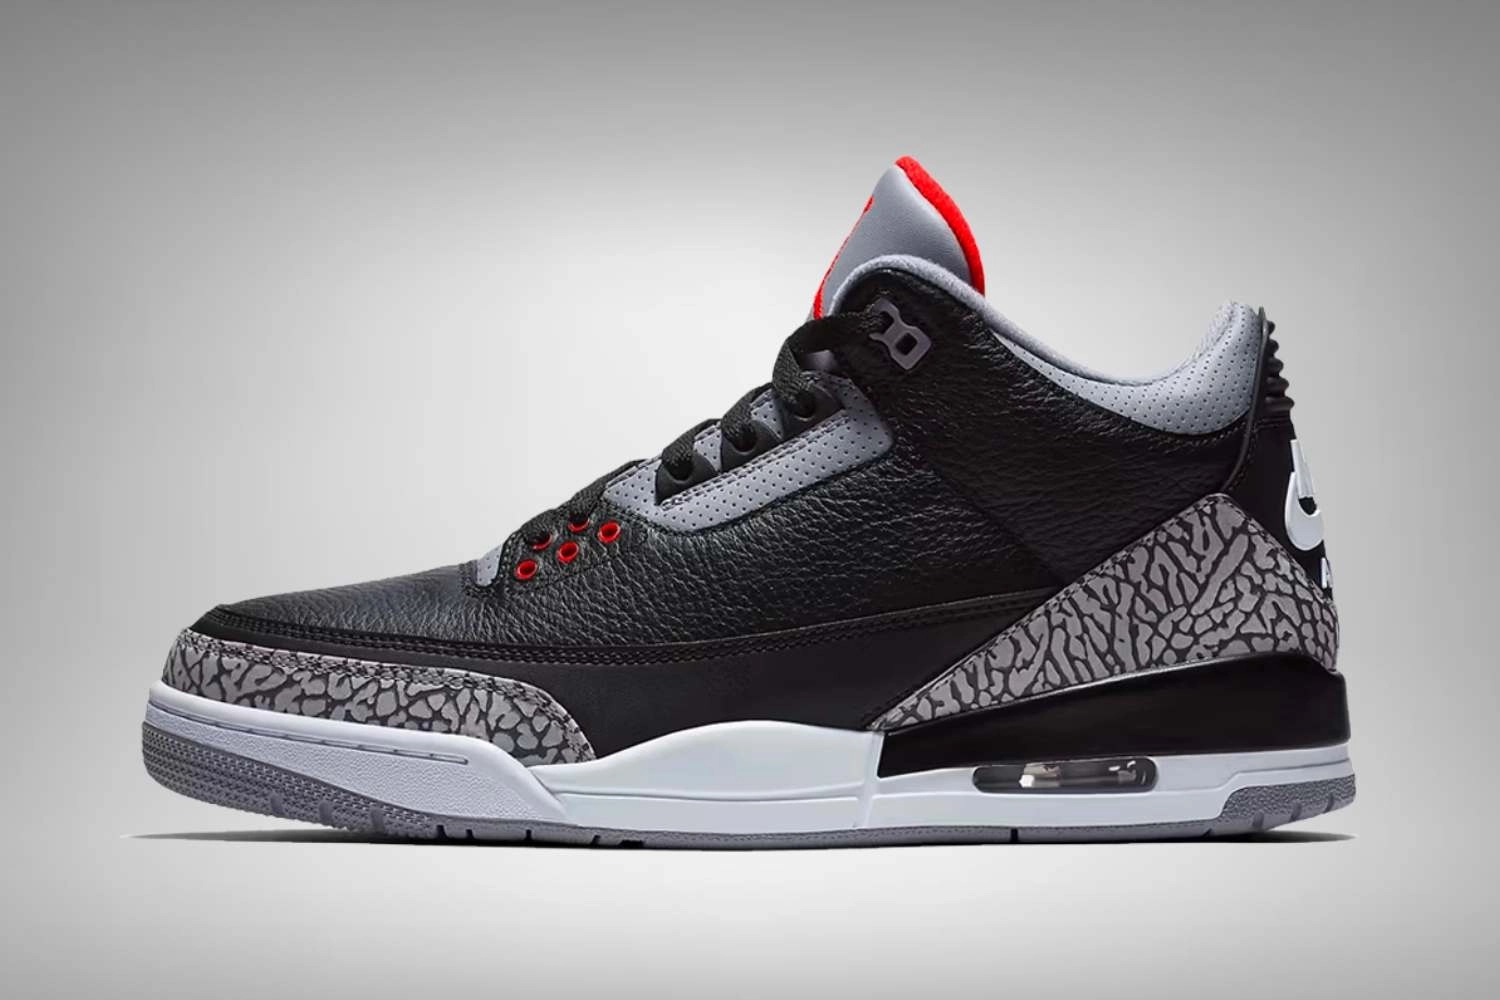 We can expect the Air Jordan 3 'Black Cement Reimagined' in November 2024